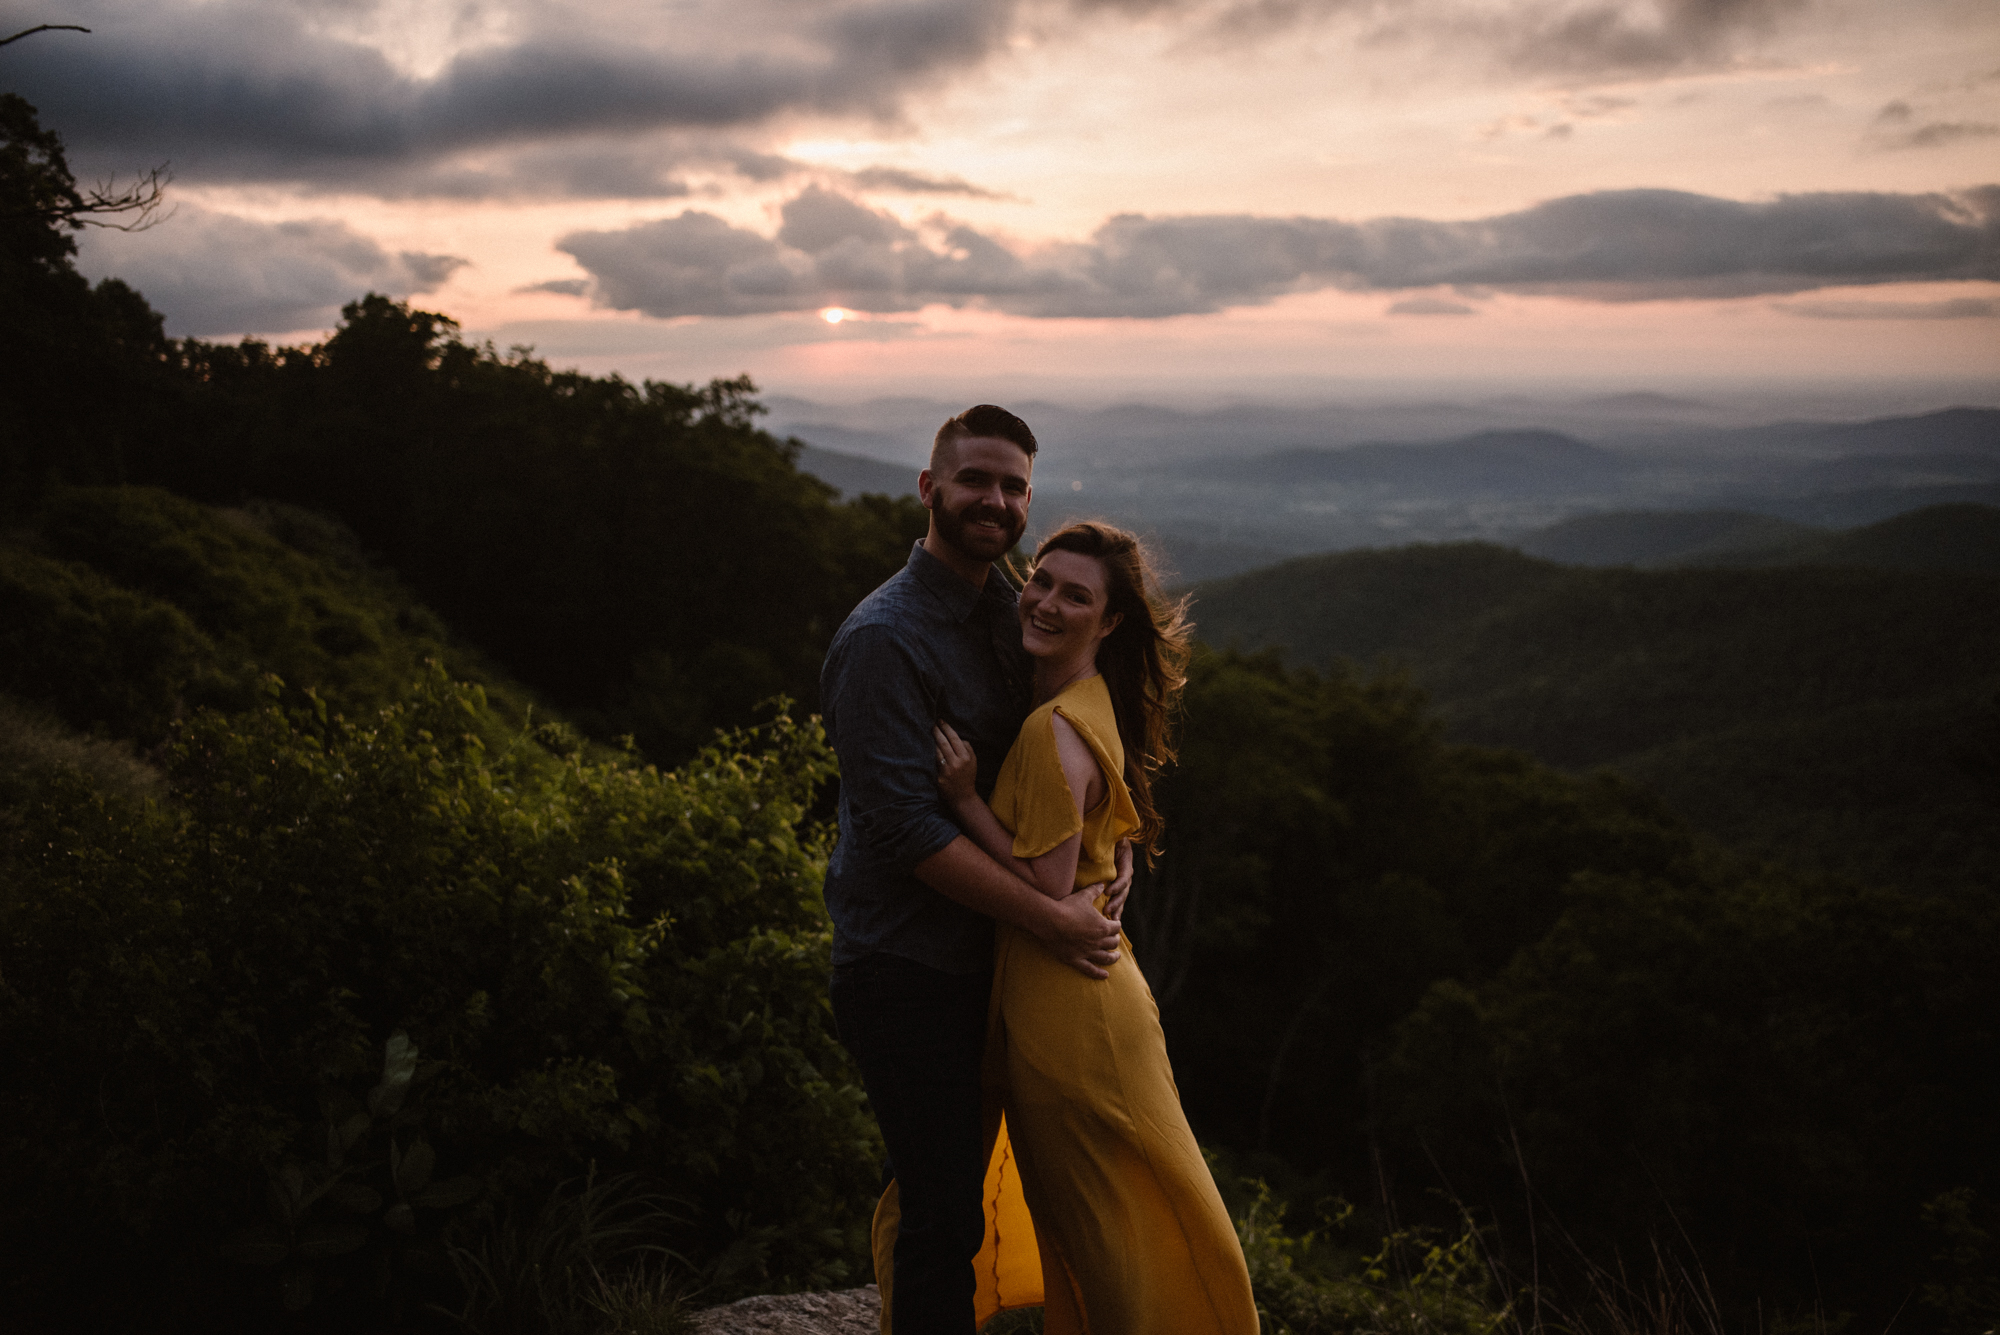 Camryn and Larry Sunrise Engagement Session in Shenandoah National Park - Things to Do in Luray Virginia - Adventurous Couple Photo Shoot White Sails Creative_1.jpg